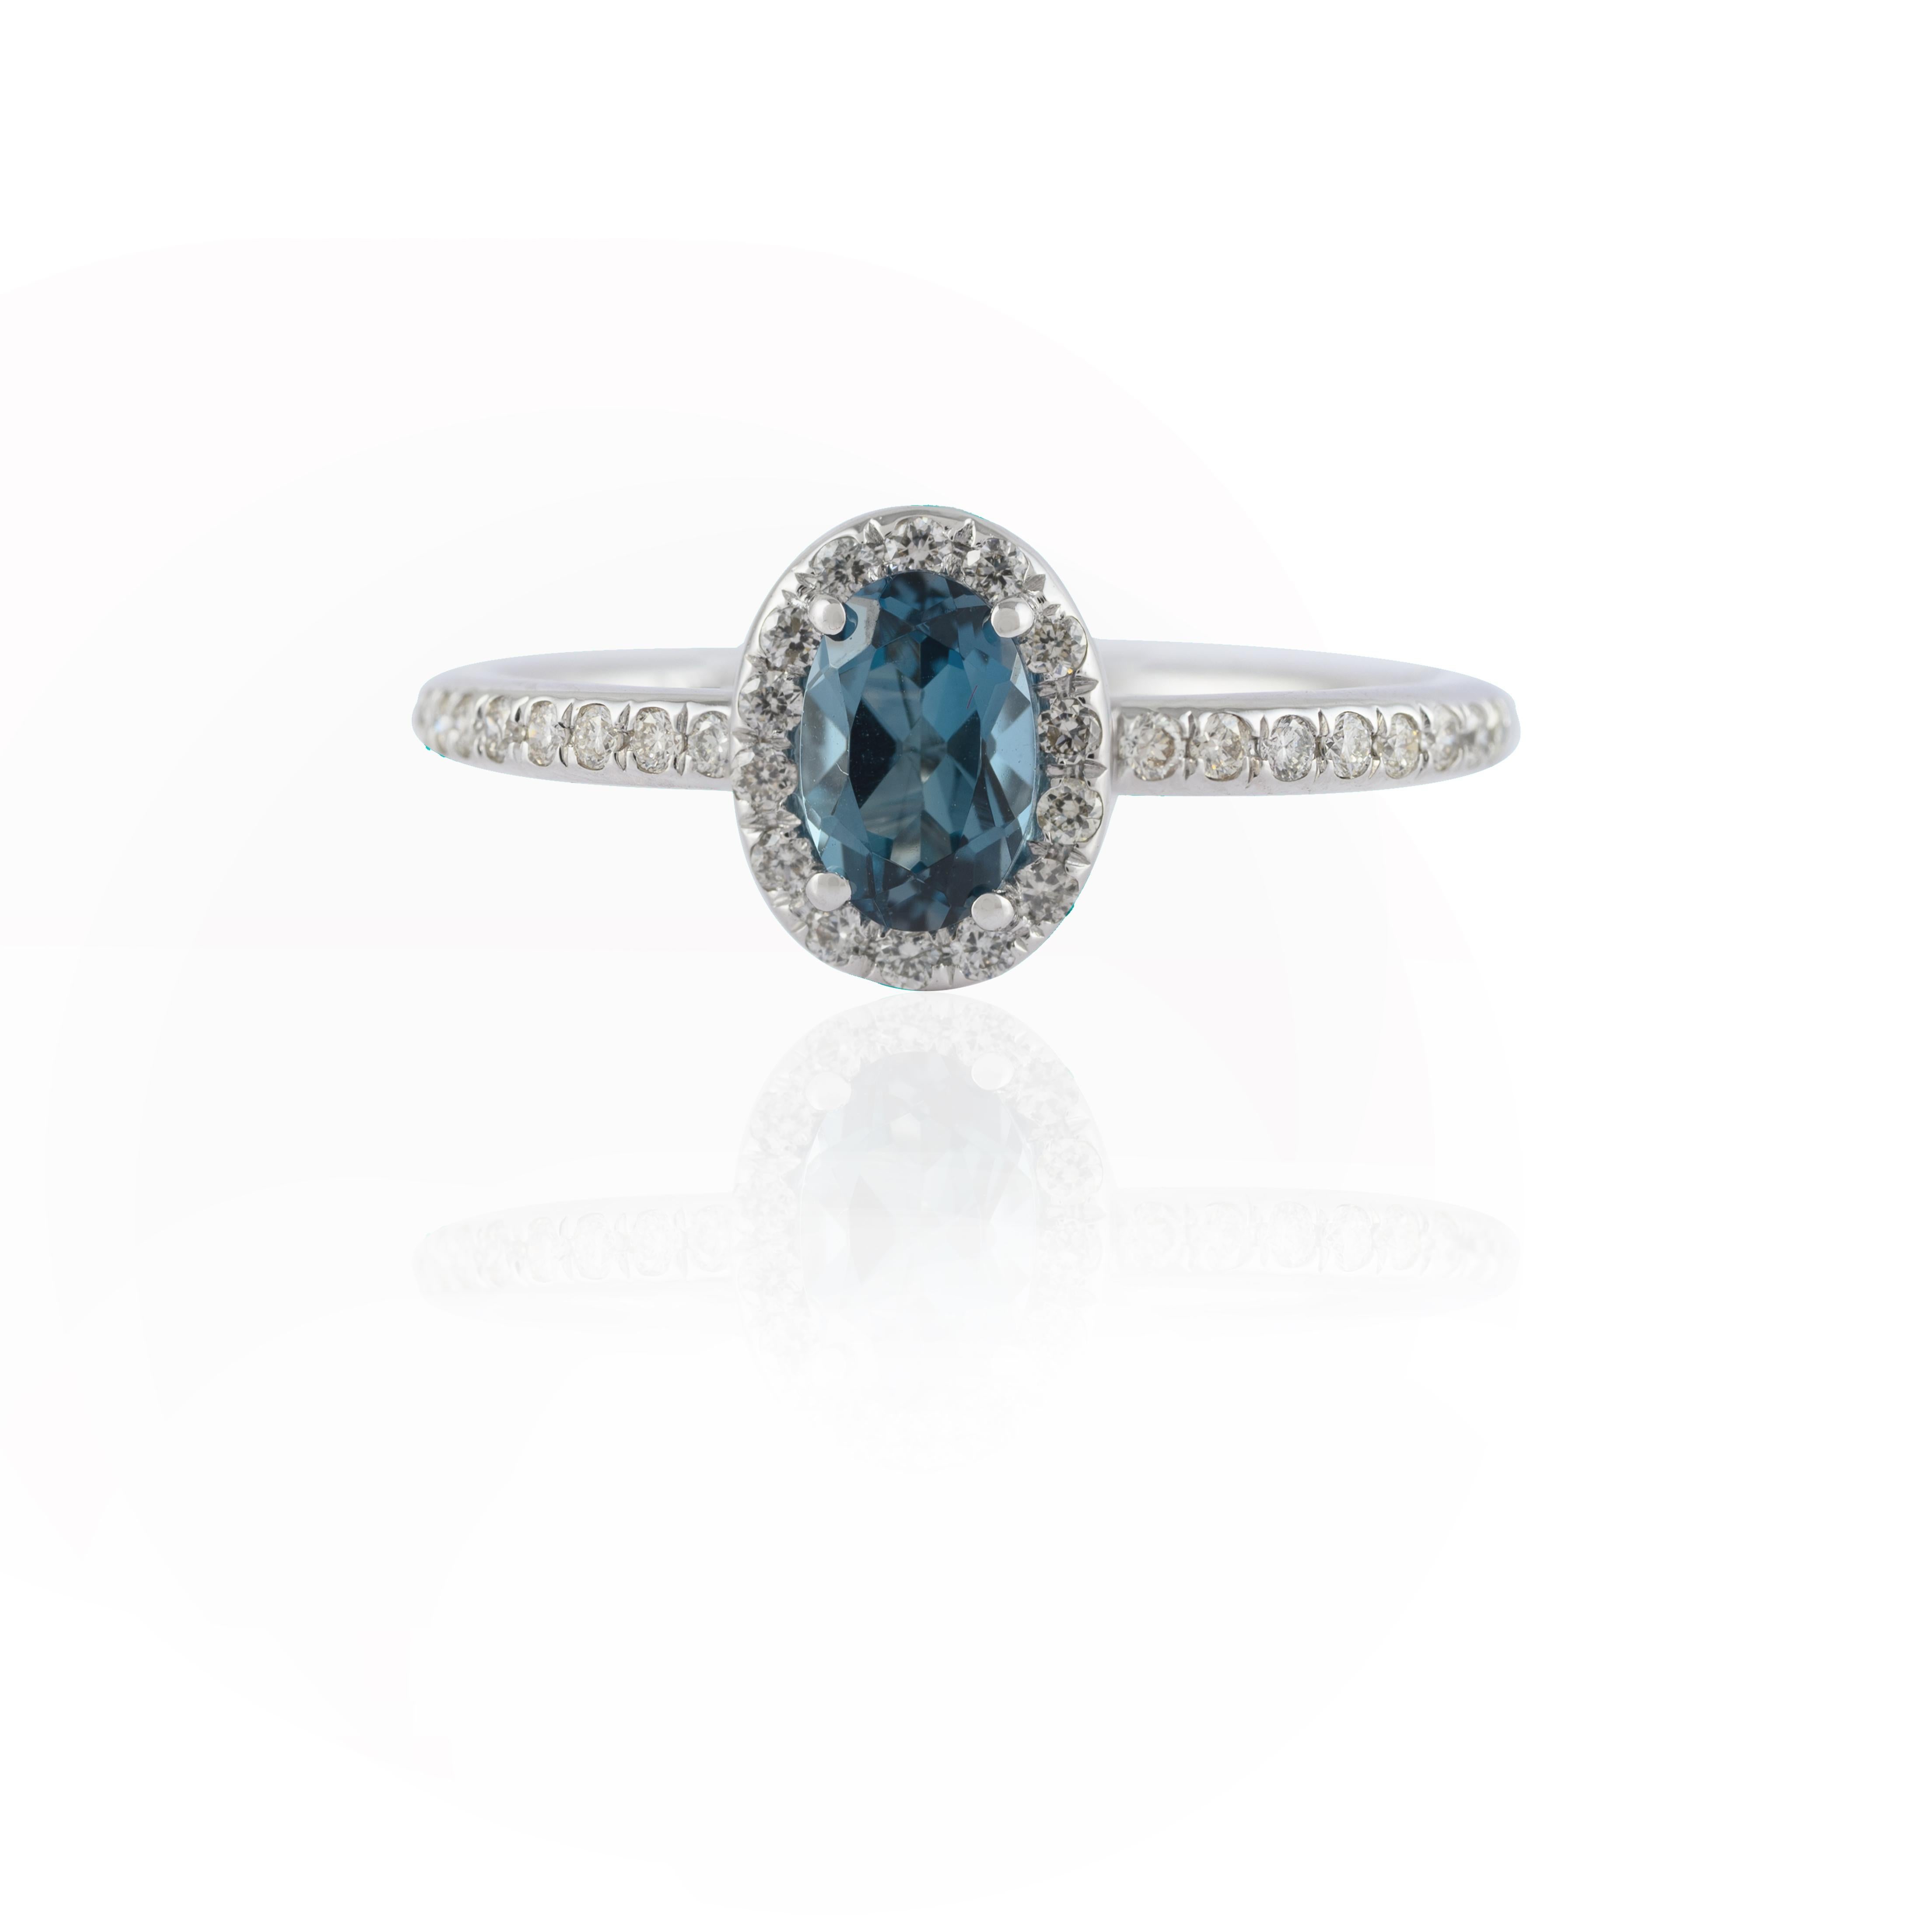 For Sale:  Natural 5.84 ct Blue Topaz and Halo Diamond Classic Ring in 14 Karat White Gold 2